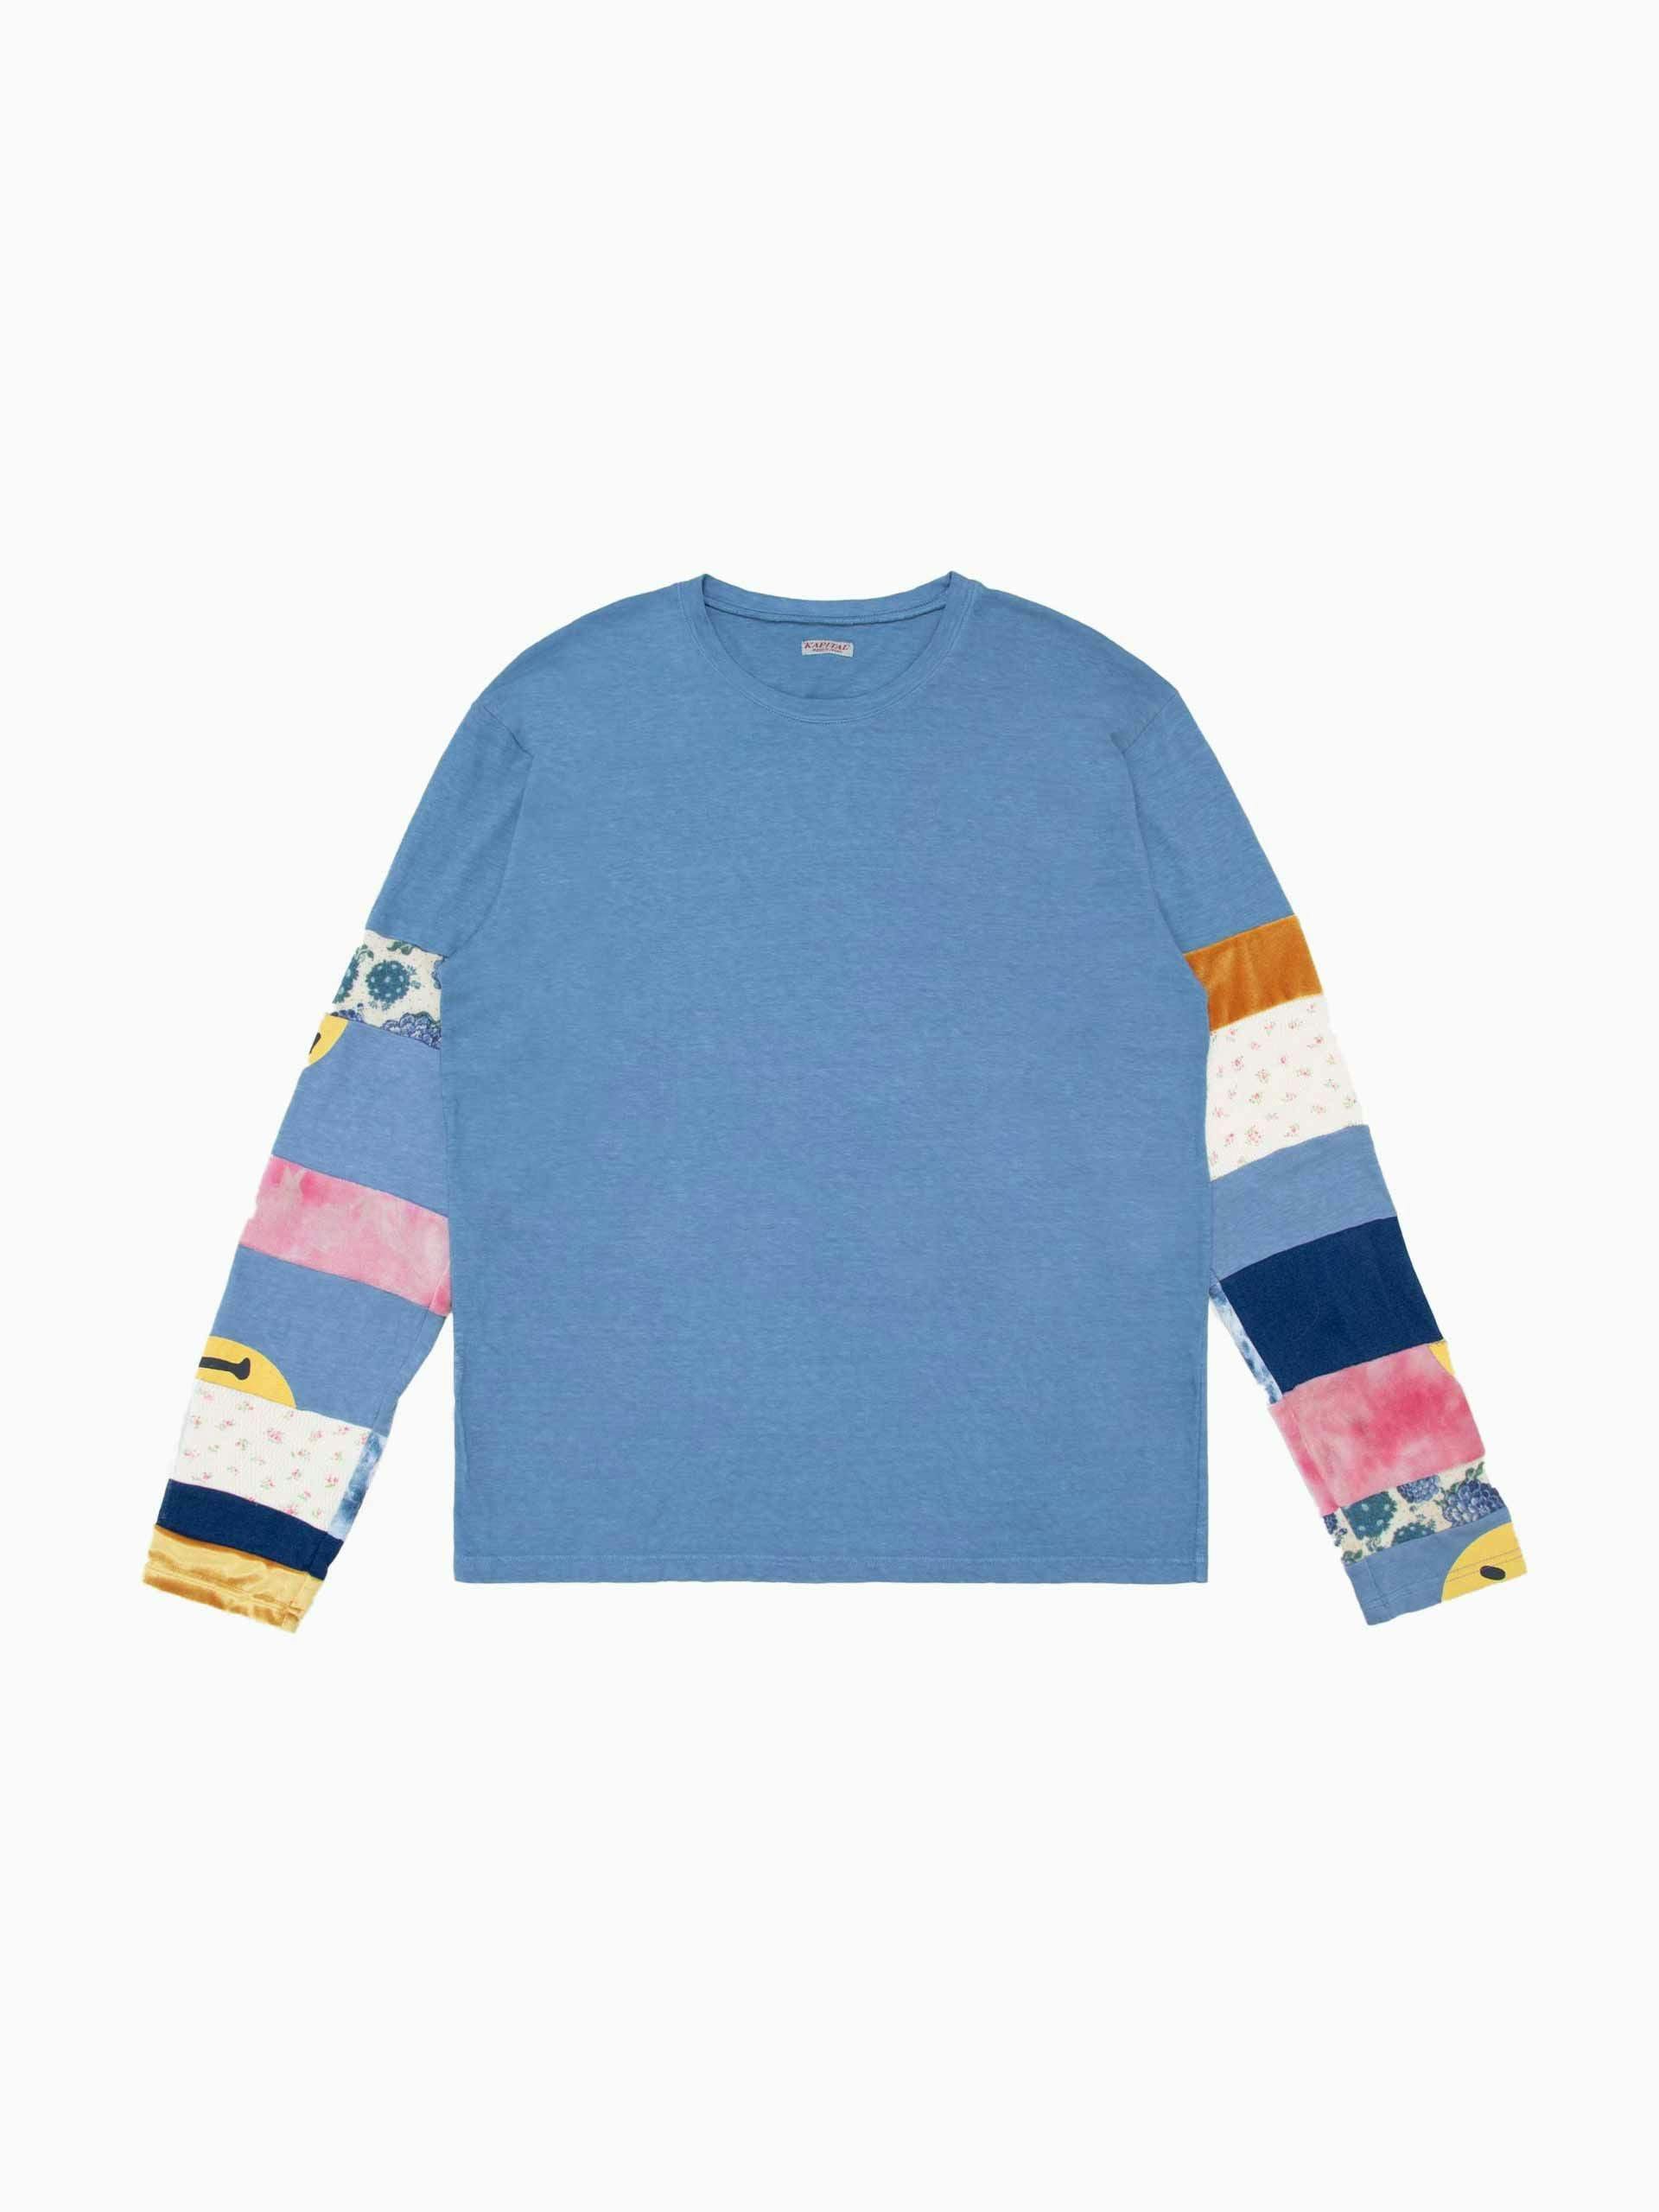 Smiles nomad patch long sleeve tee